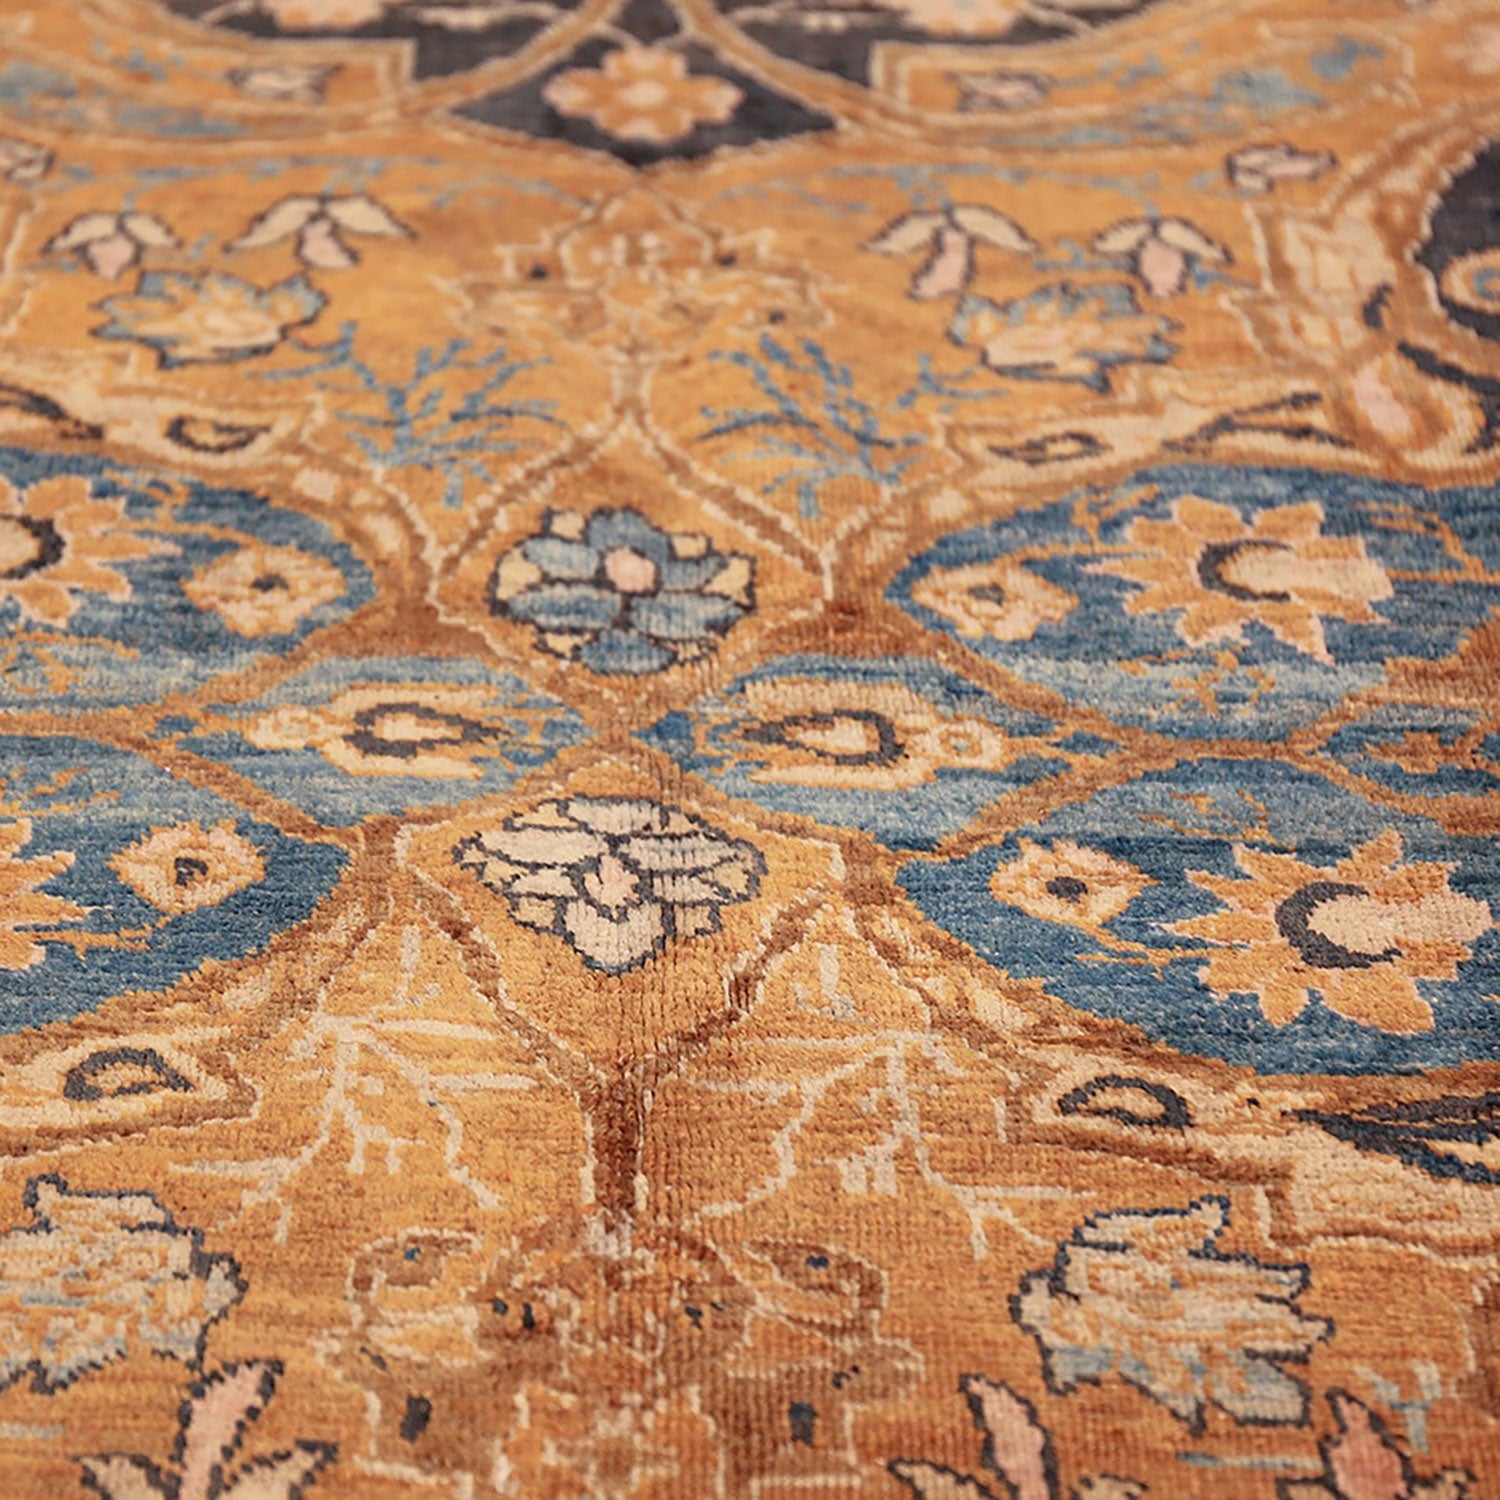 Close-up of a worn, hand-woven carpet with floral pattern